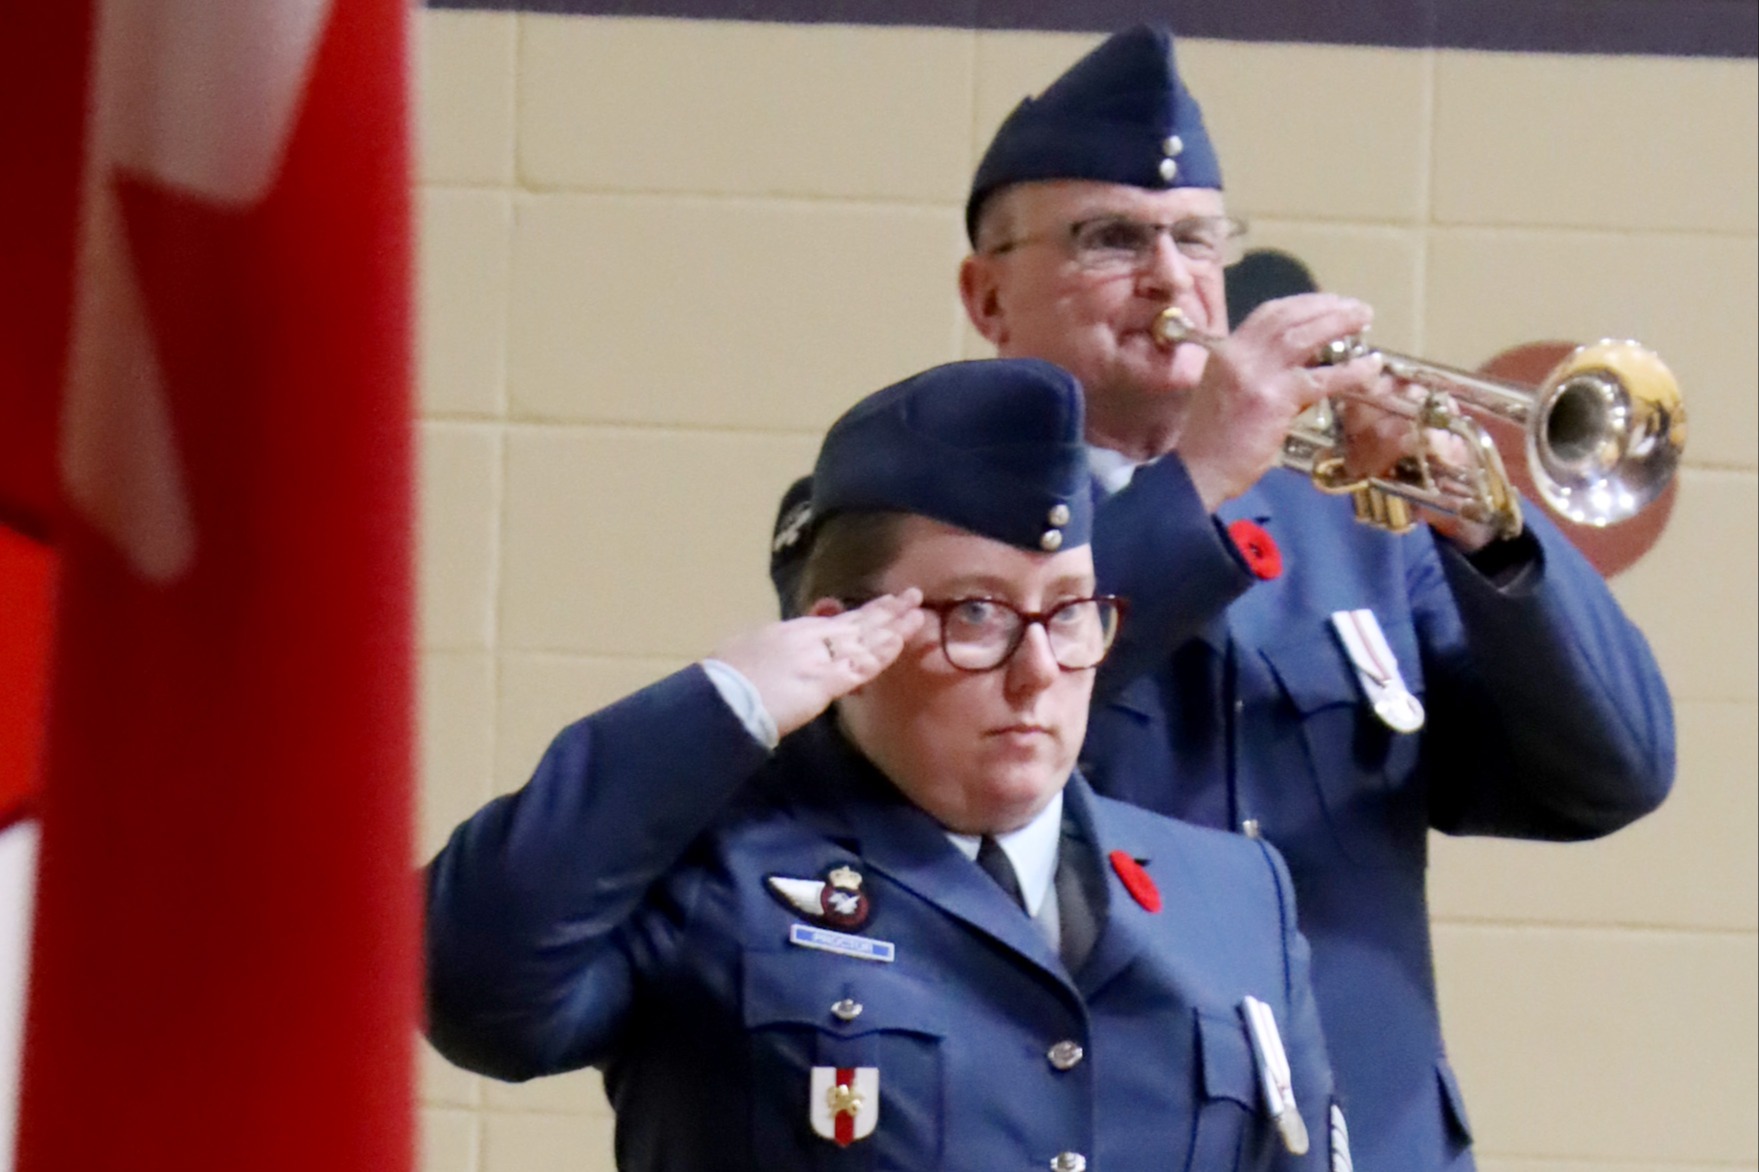 Two soldiers saluting